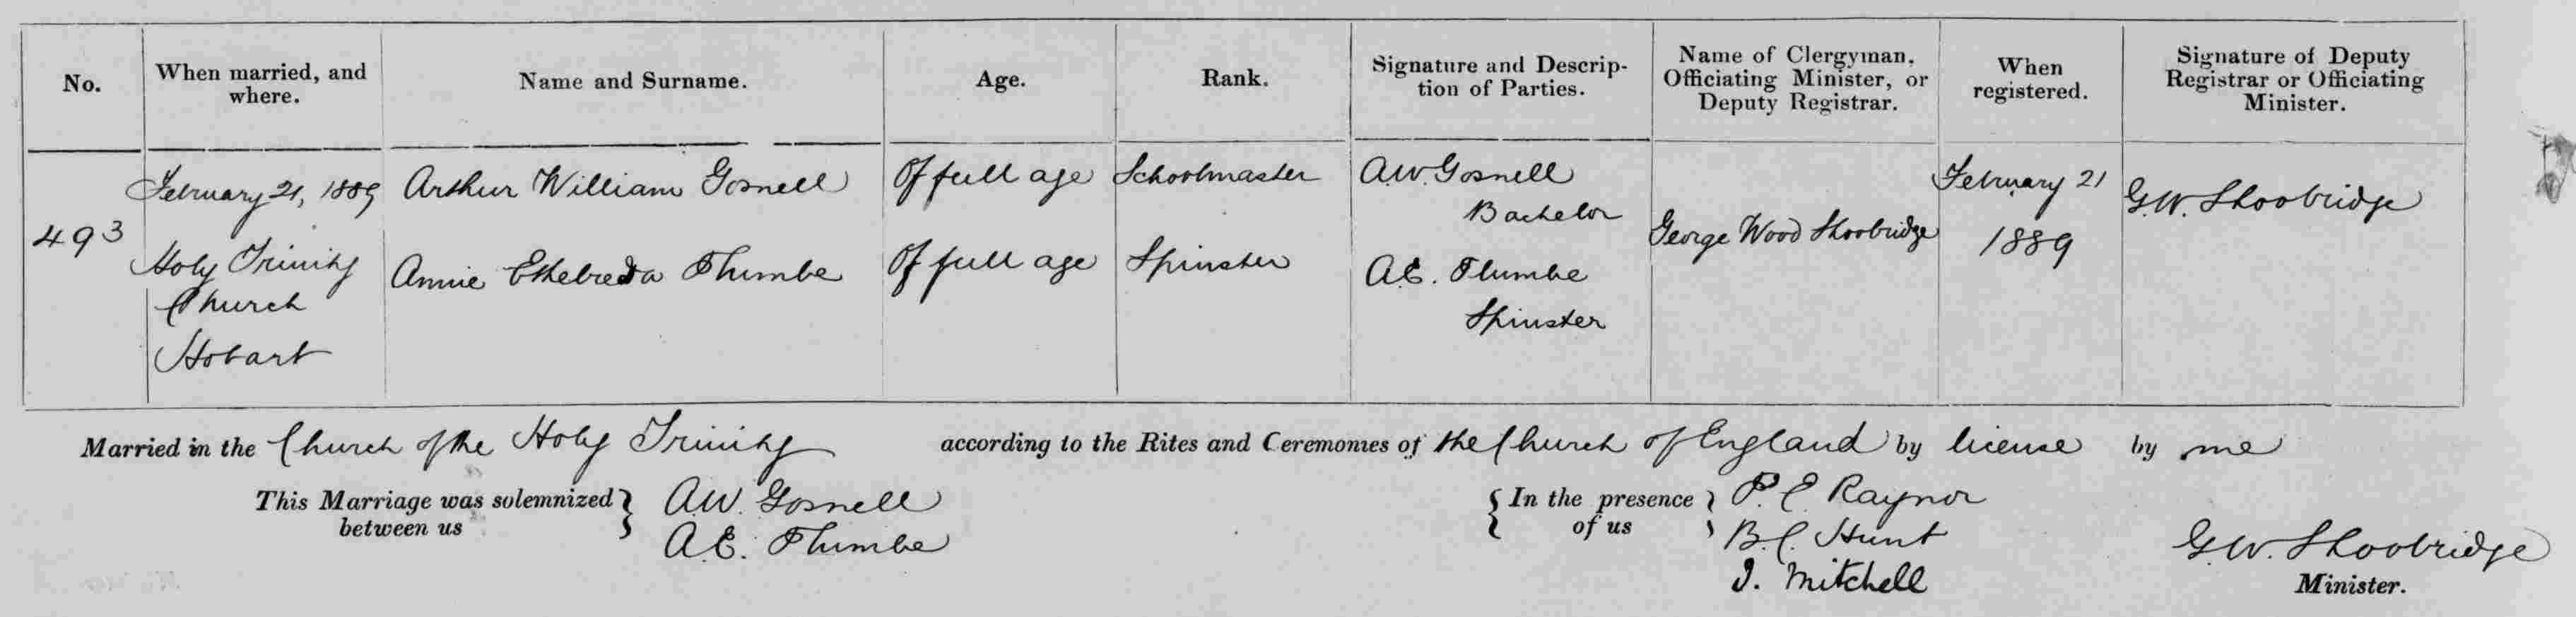 Marriage Register entry for Arthur William Gosnell and Annie Ethelreda Plumbe